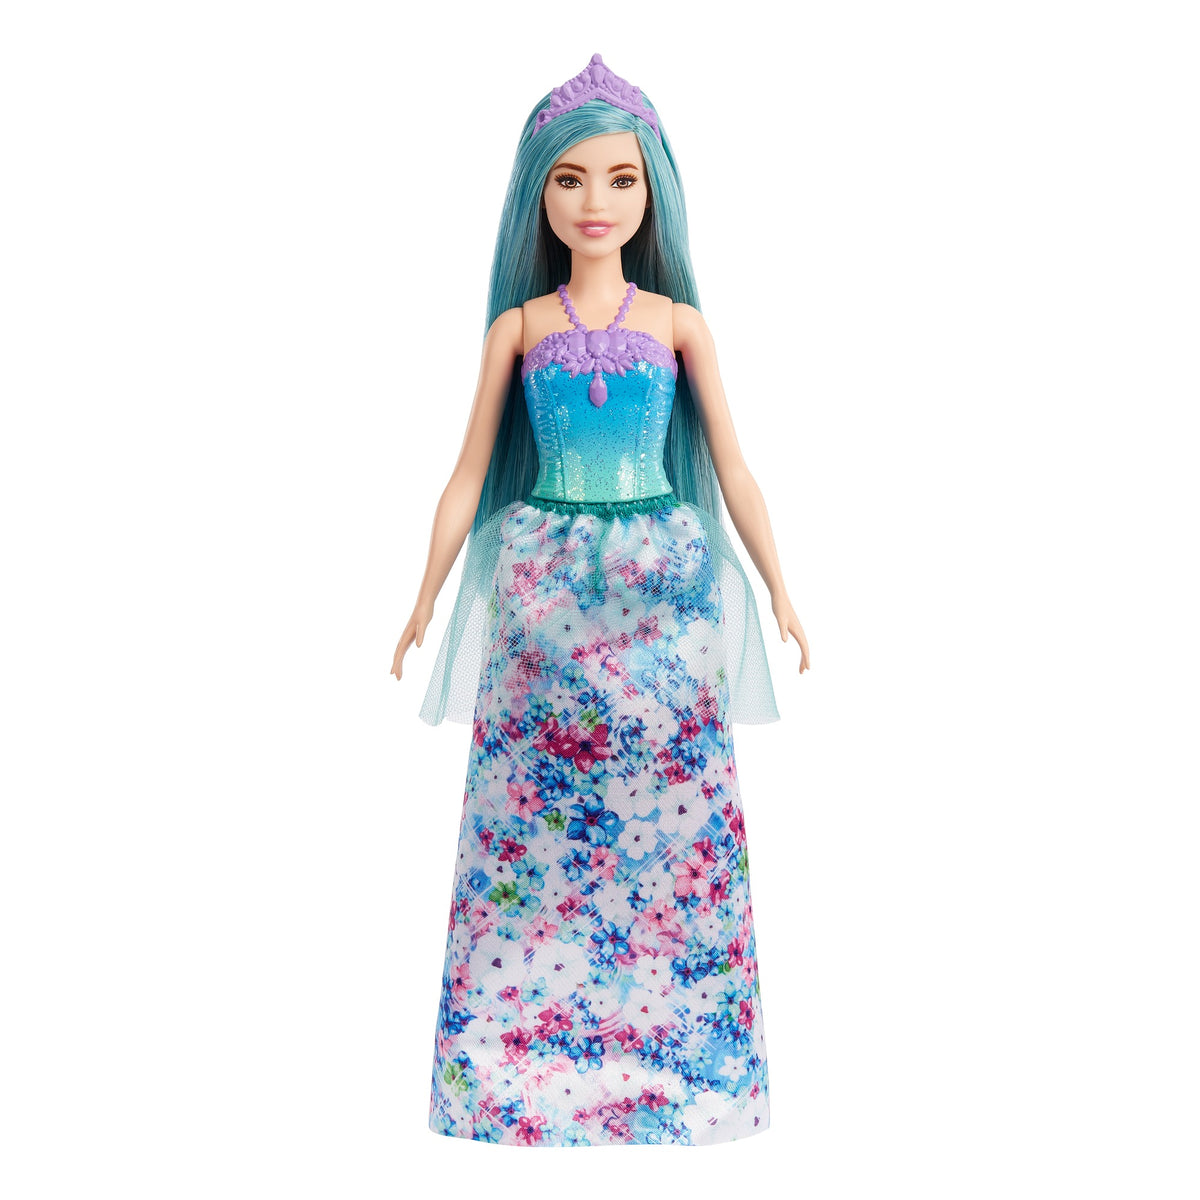 Buy Barbie Dreamtopia Petite-Turquoise Hair Princess Doll with ...